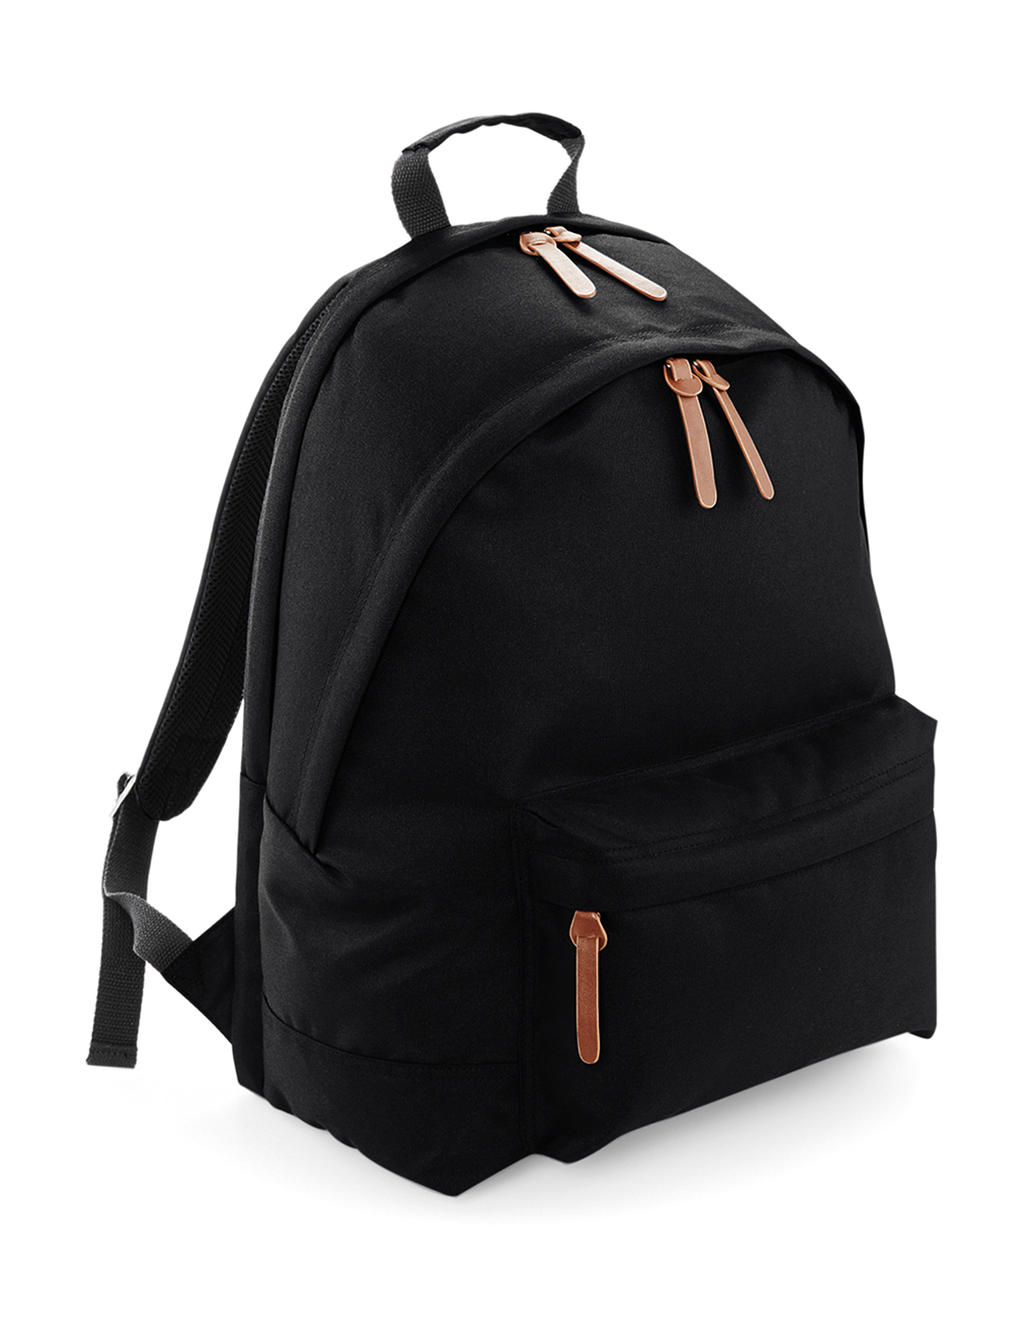  Campus Laptop Backpack in Farbe Black